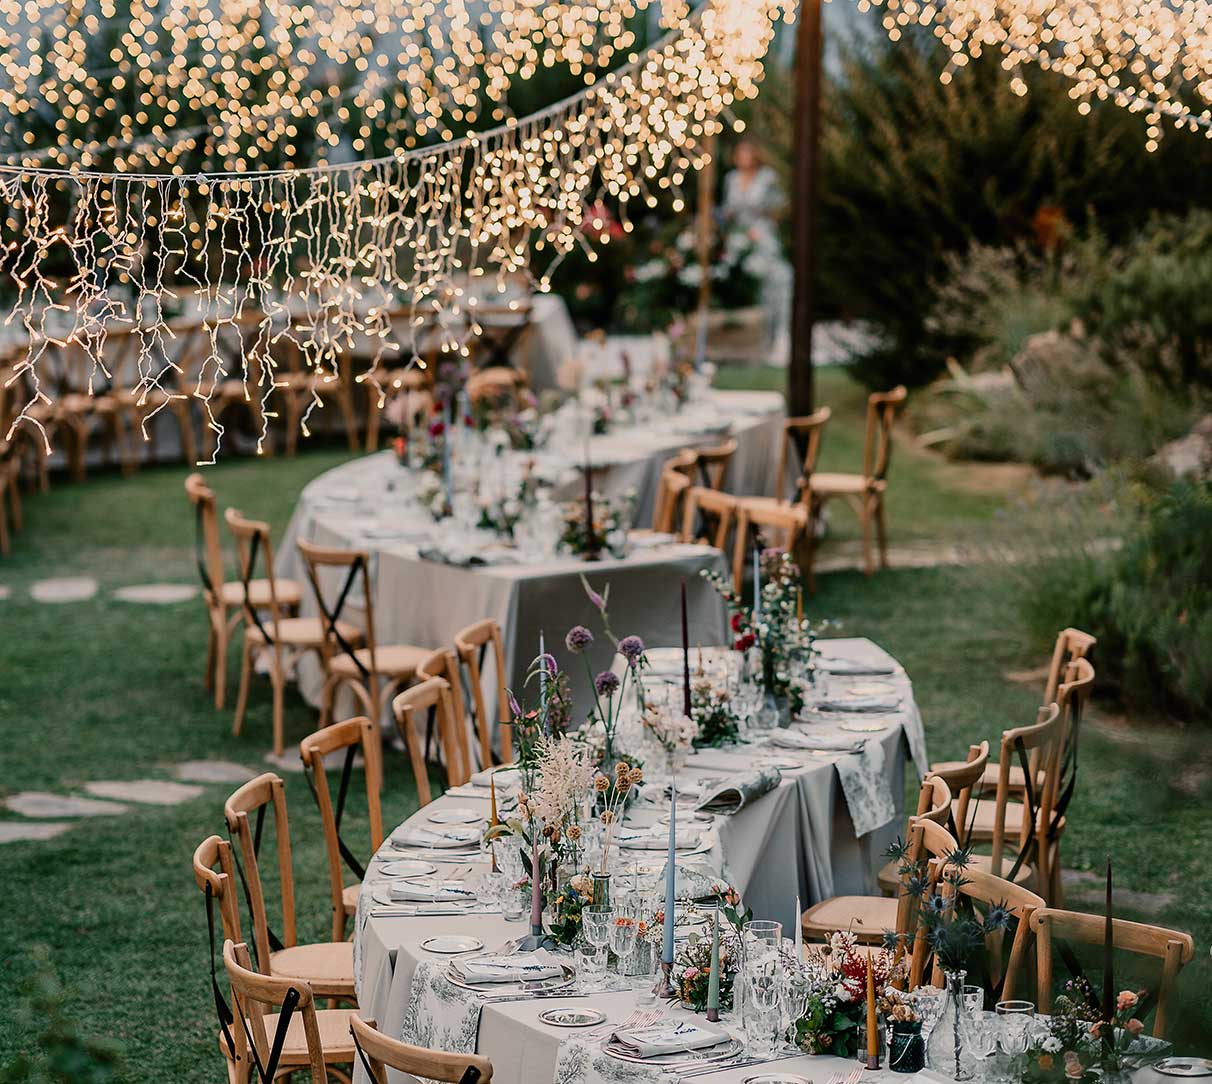 table setting - unconventional wedding table - al fresco wedding dinner in Umbria - wedding coordinator in Italy - Dream on wedding planner Italy